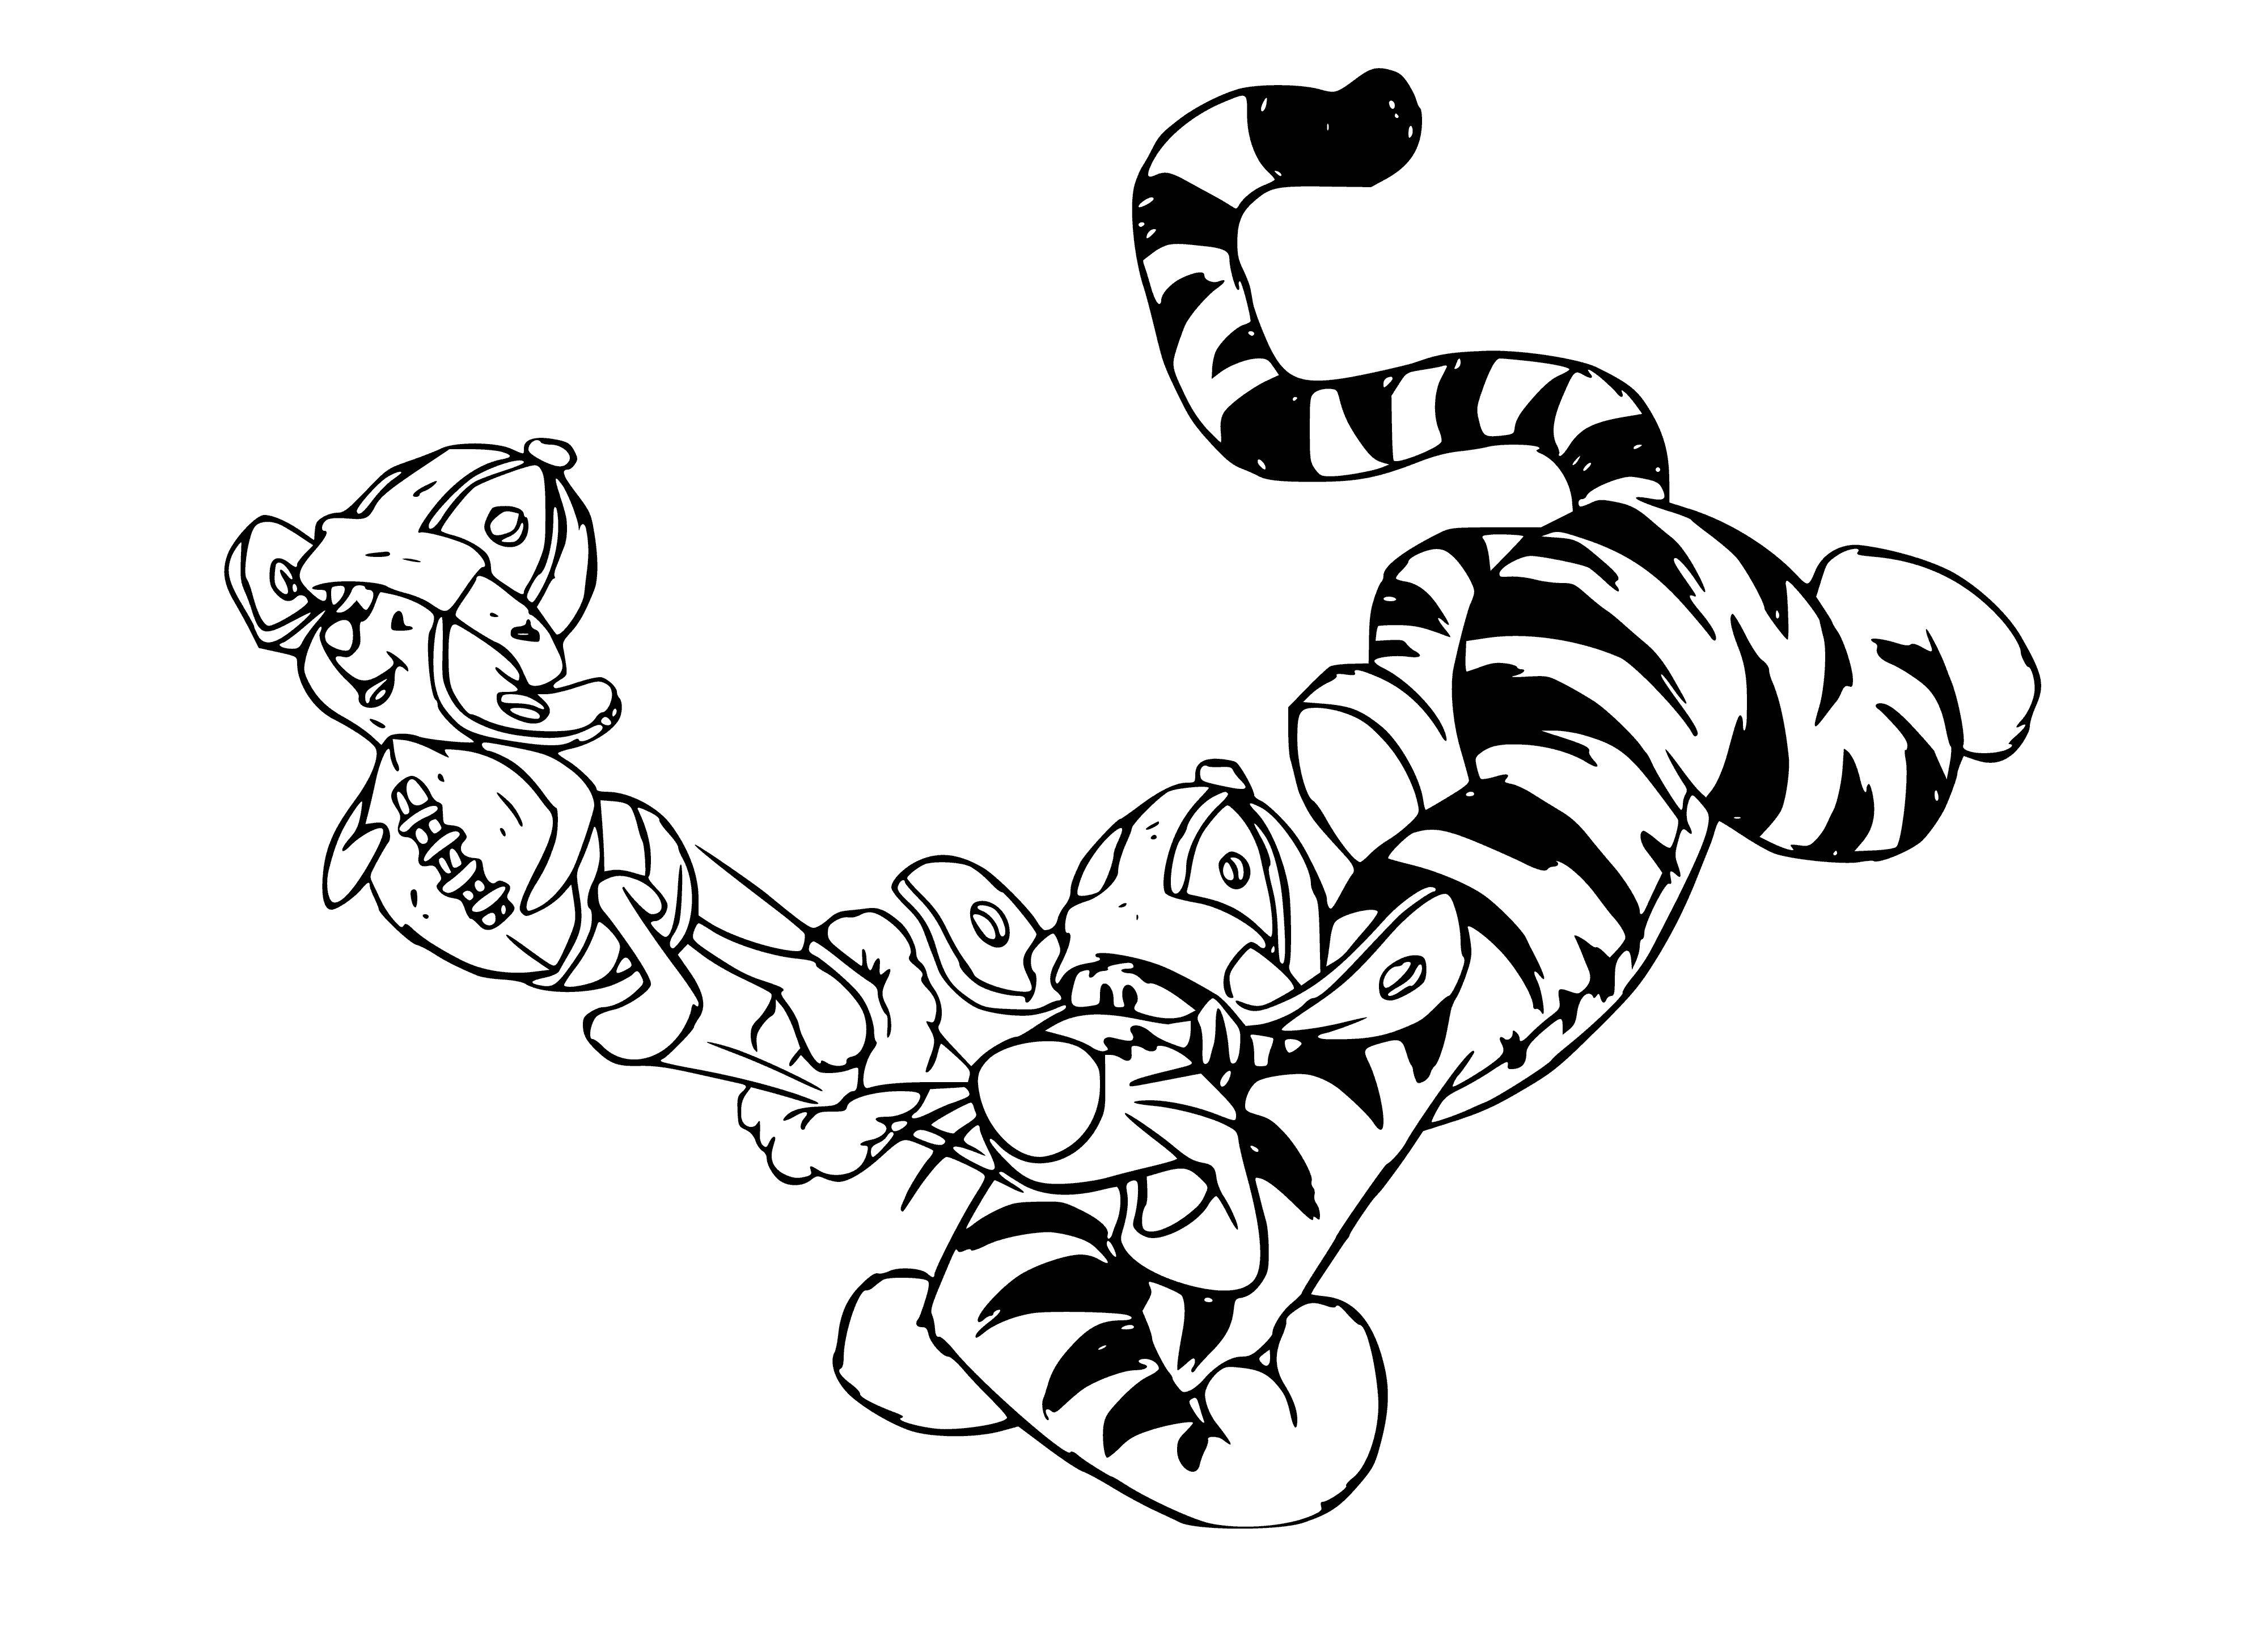 Baby Roo and Tigger coloring page